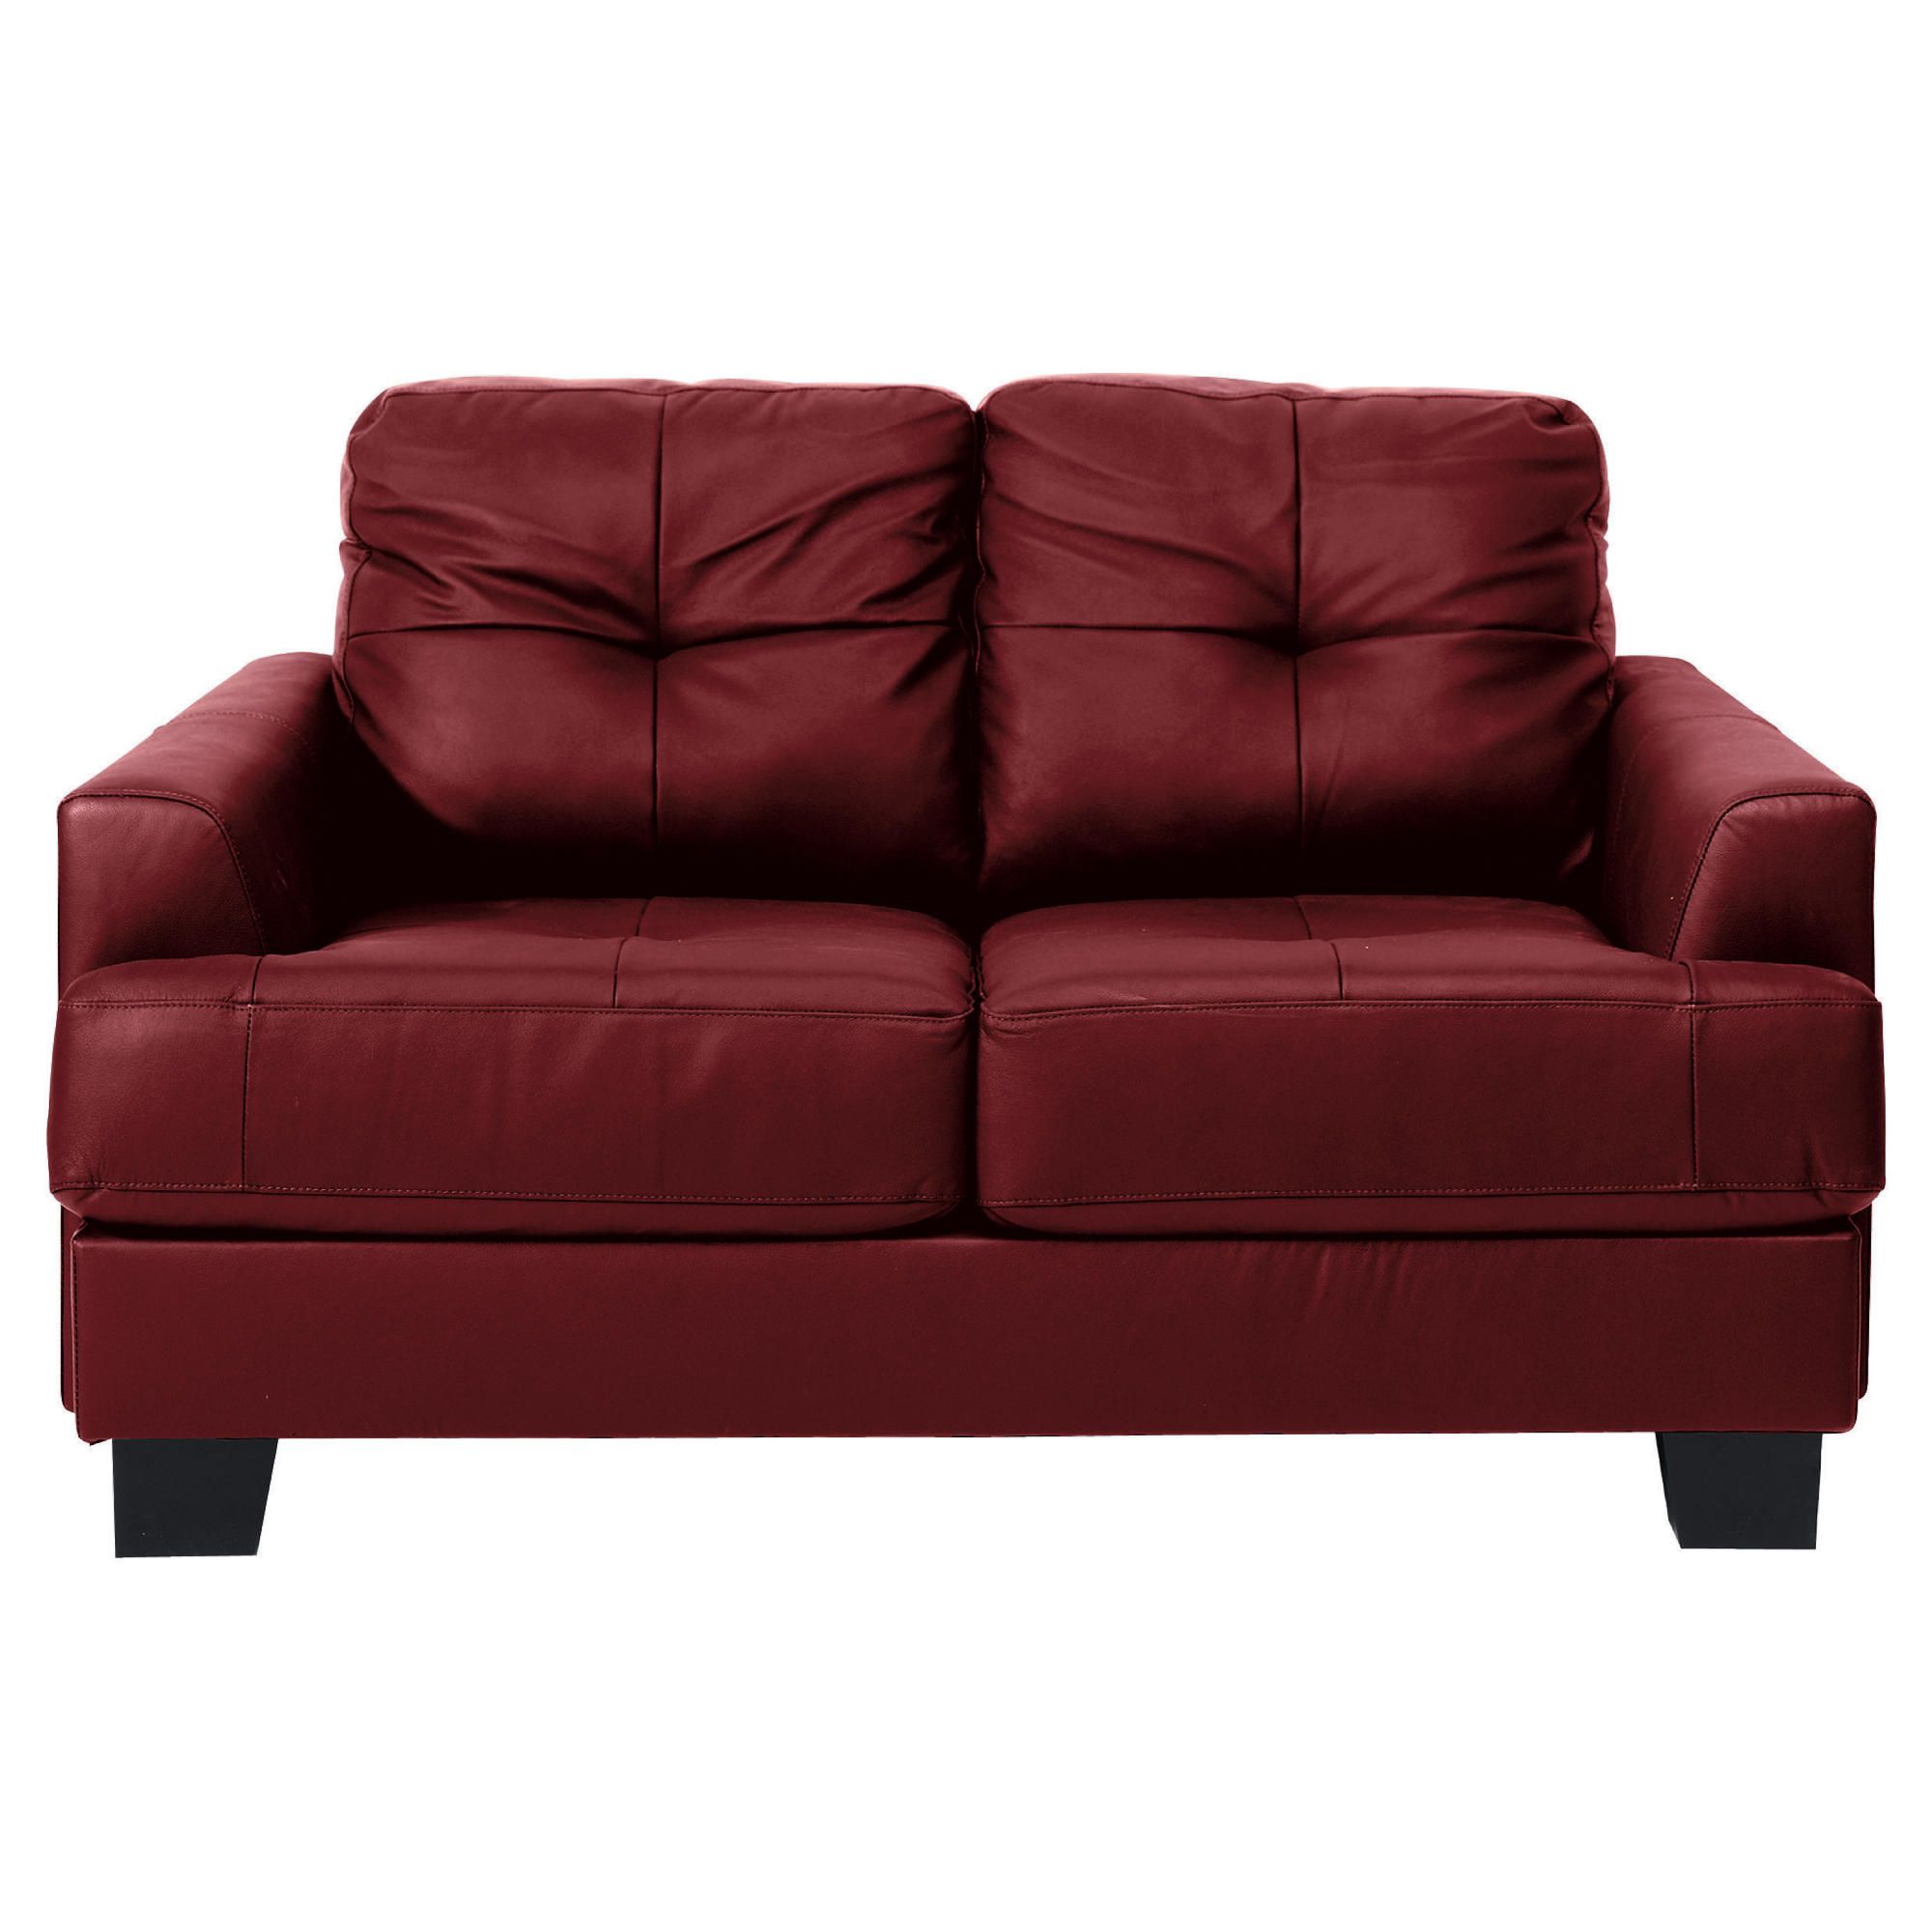 Utah Small Leather Sofa, Red at Tesco Direct